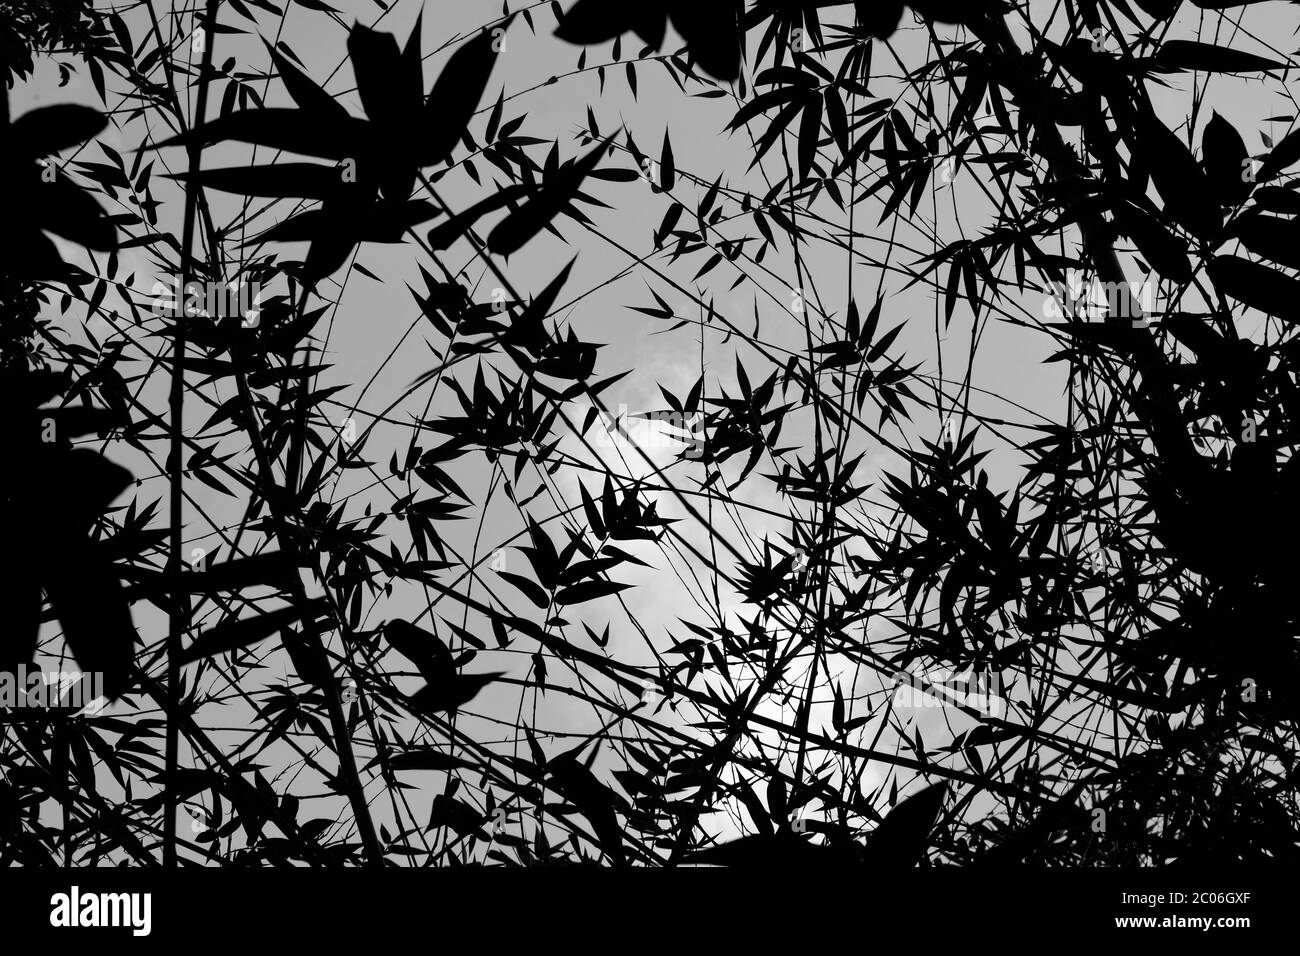 Bamboo leaves textures and patterns isolated black and white background Stock Photo